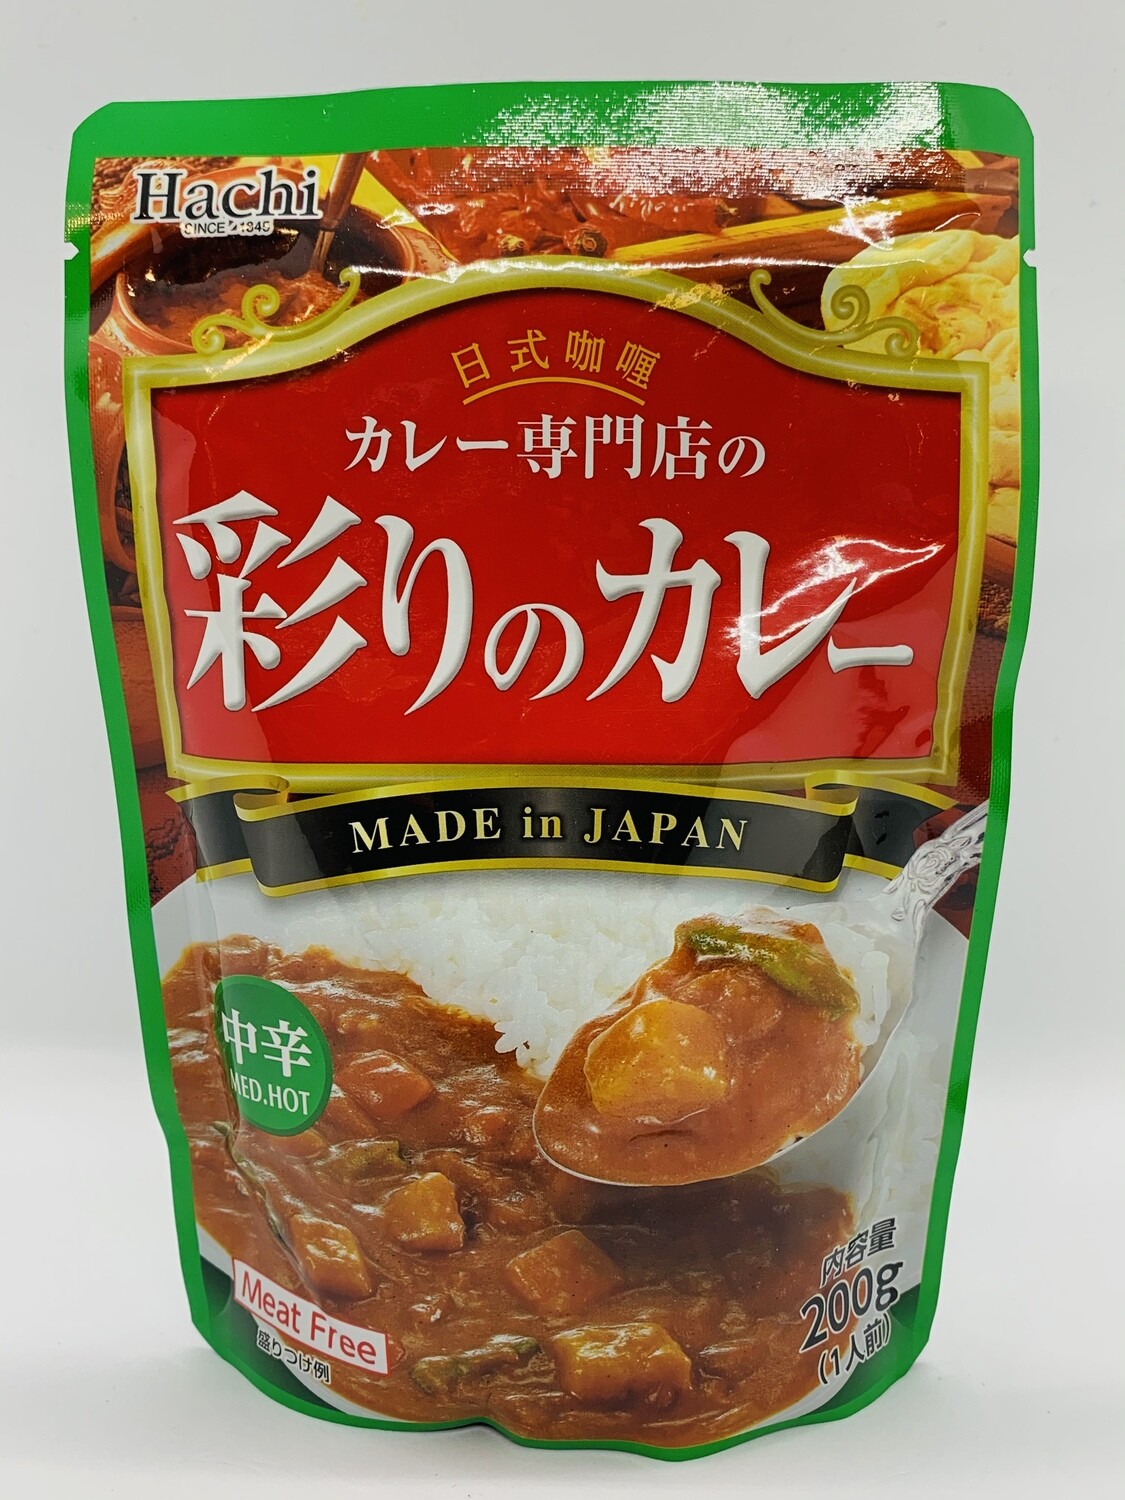 Hachi Curry Sauce MedHot 200g